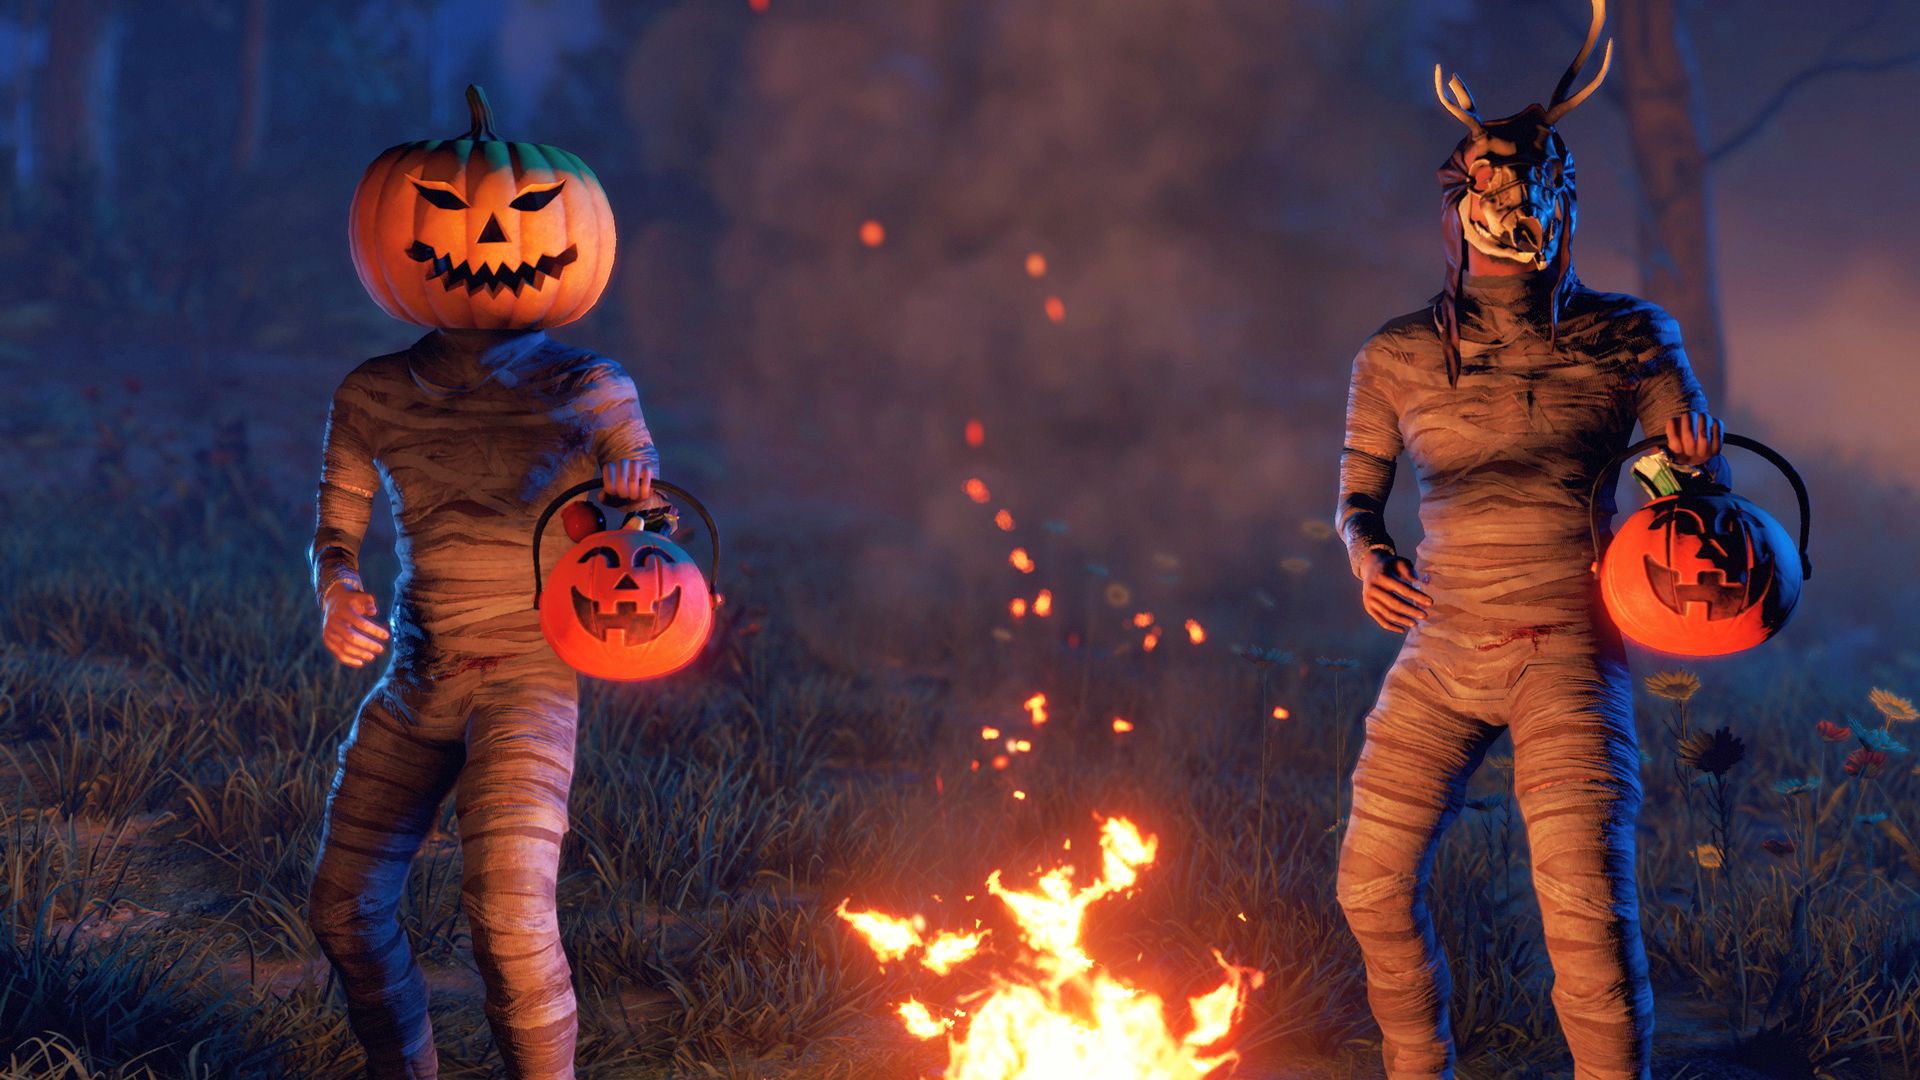 Rust’s Halloween update is here, with a Trick or Treat event and spooky